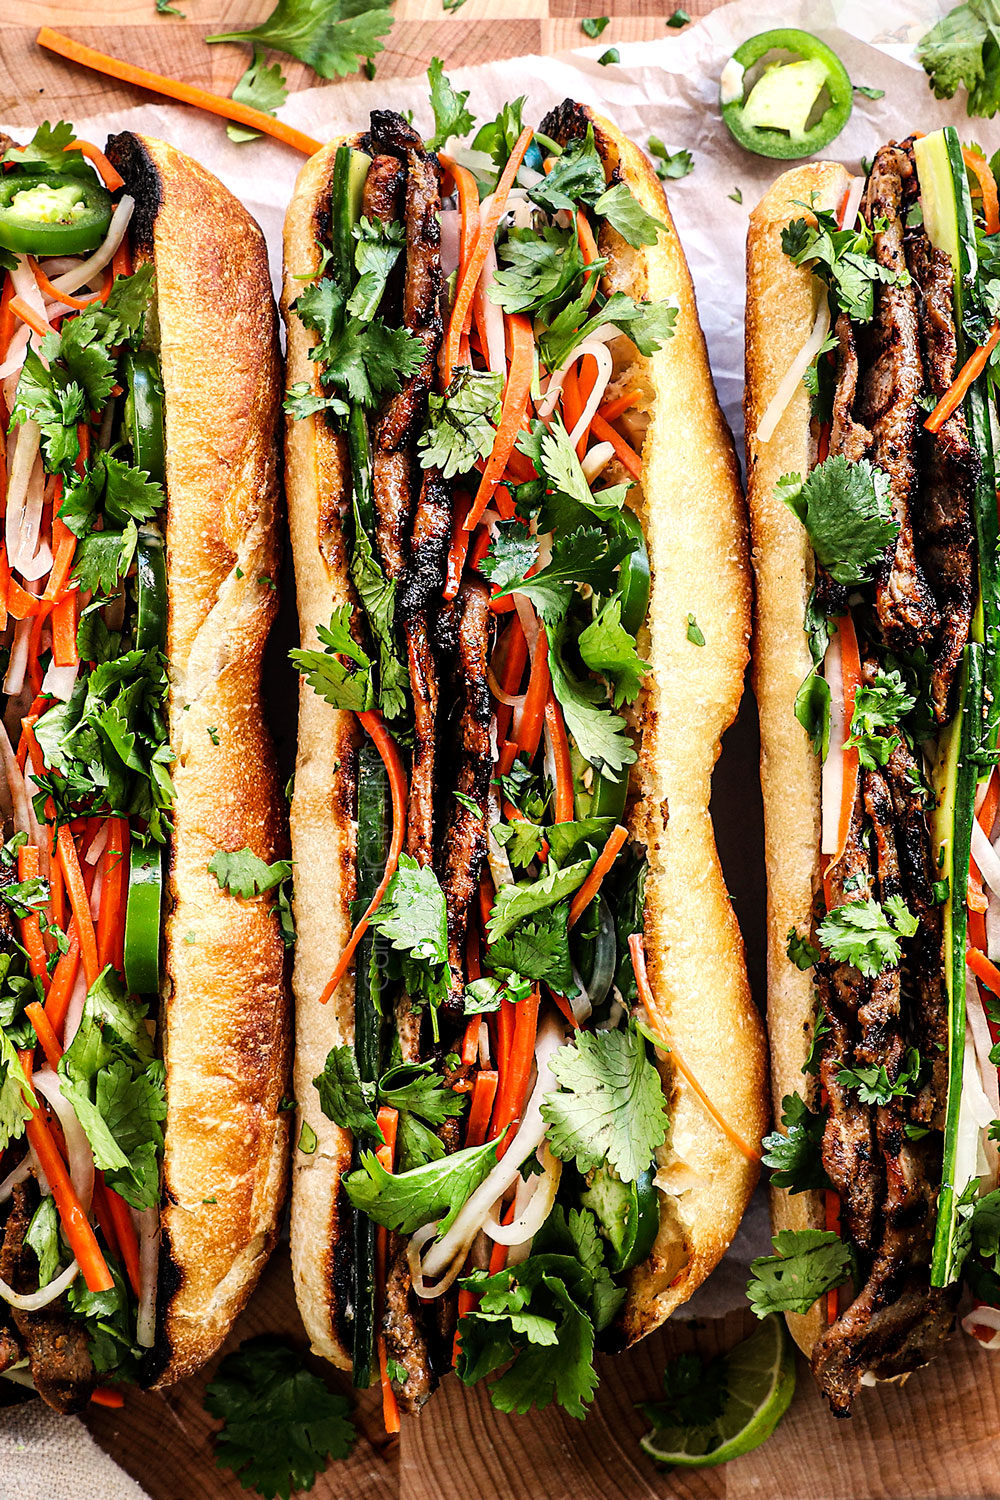 banh mi sandwich with pork layered on Vietnamese baguette